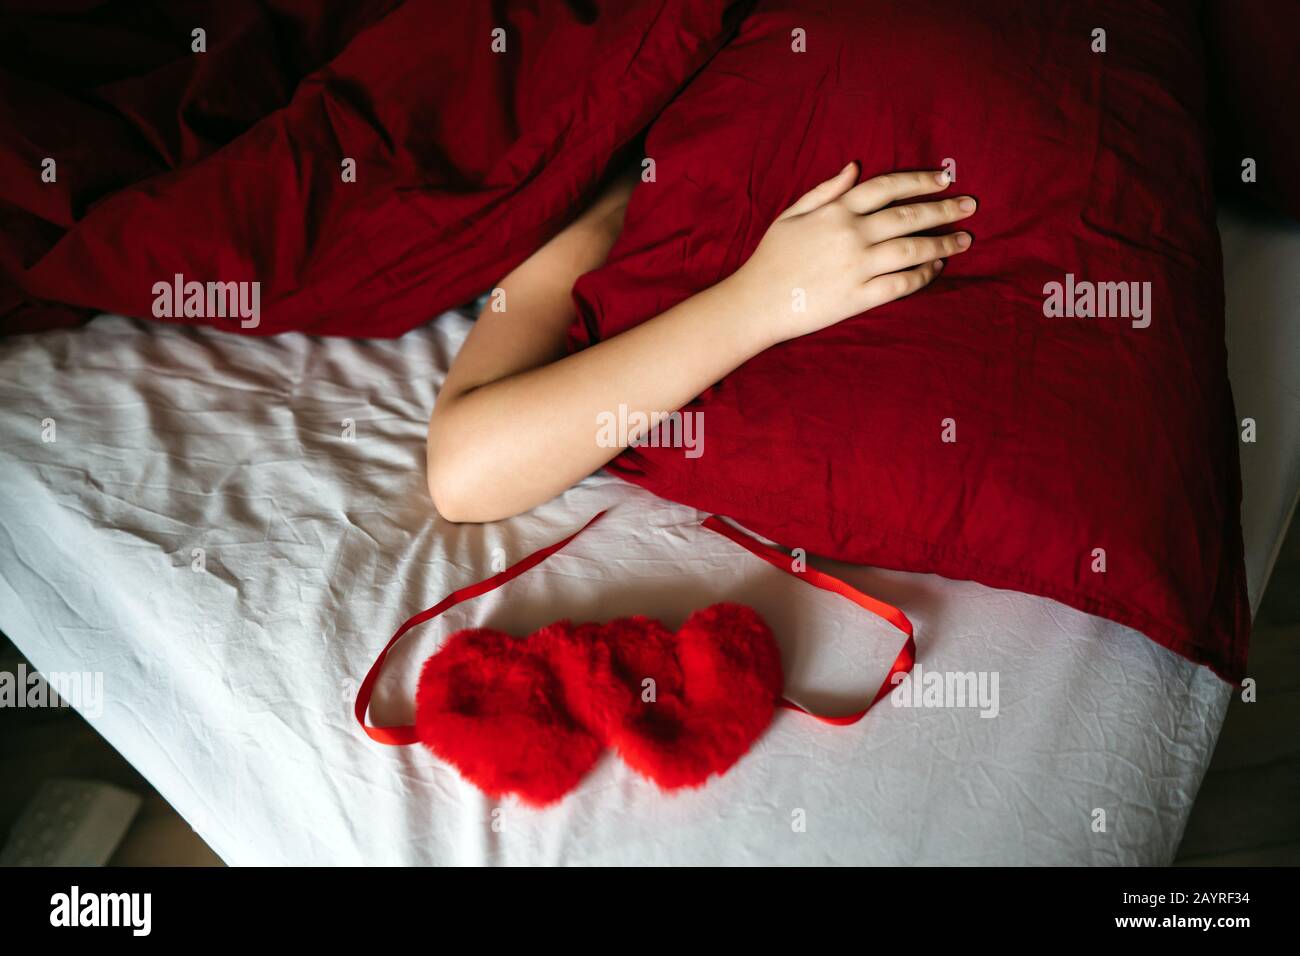 Female hand lying on a red pillow covered with a blanket. Stock Photo